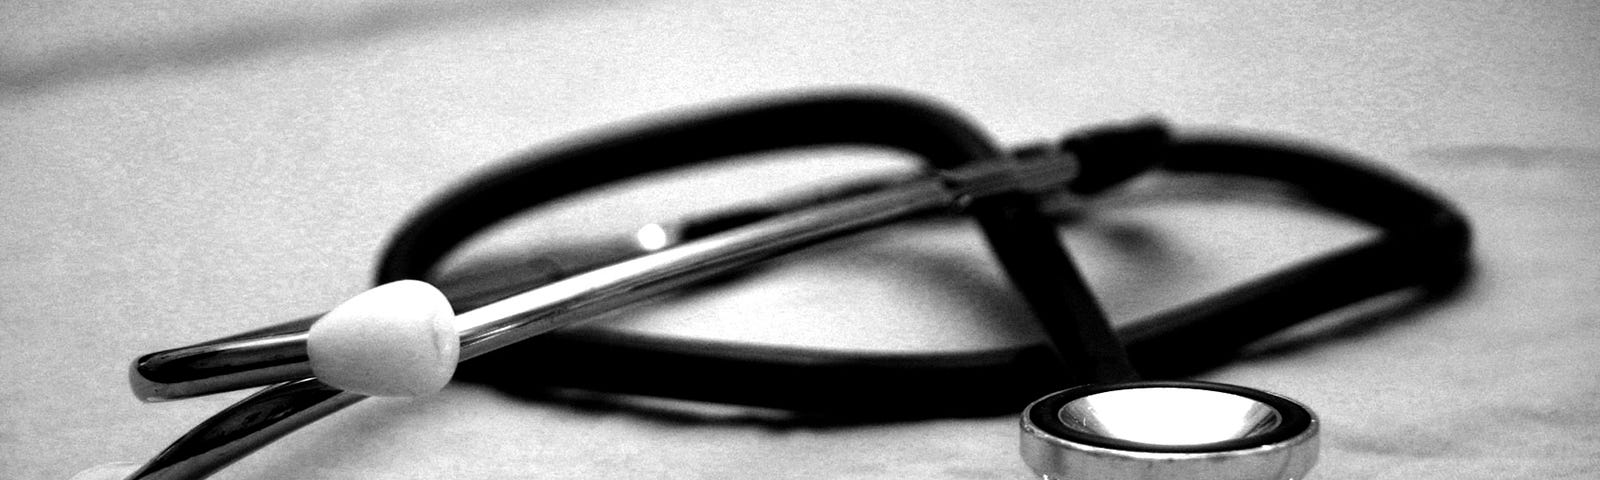 picture of a stethoscope laying on a table.